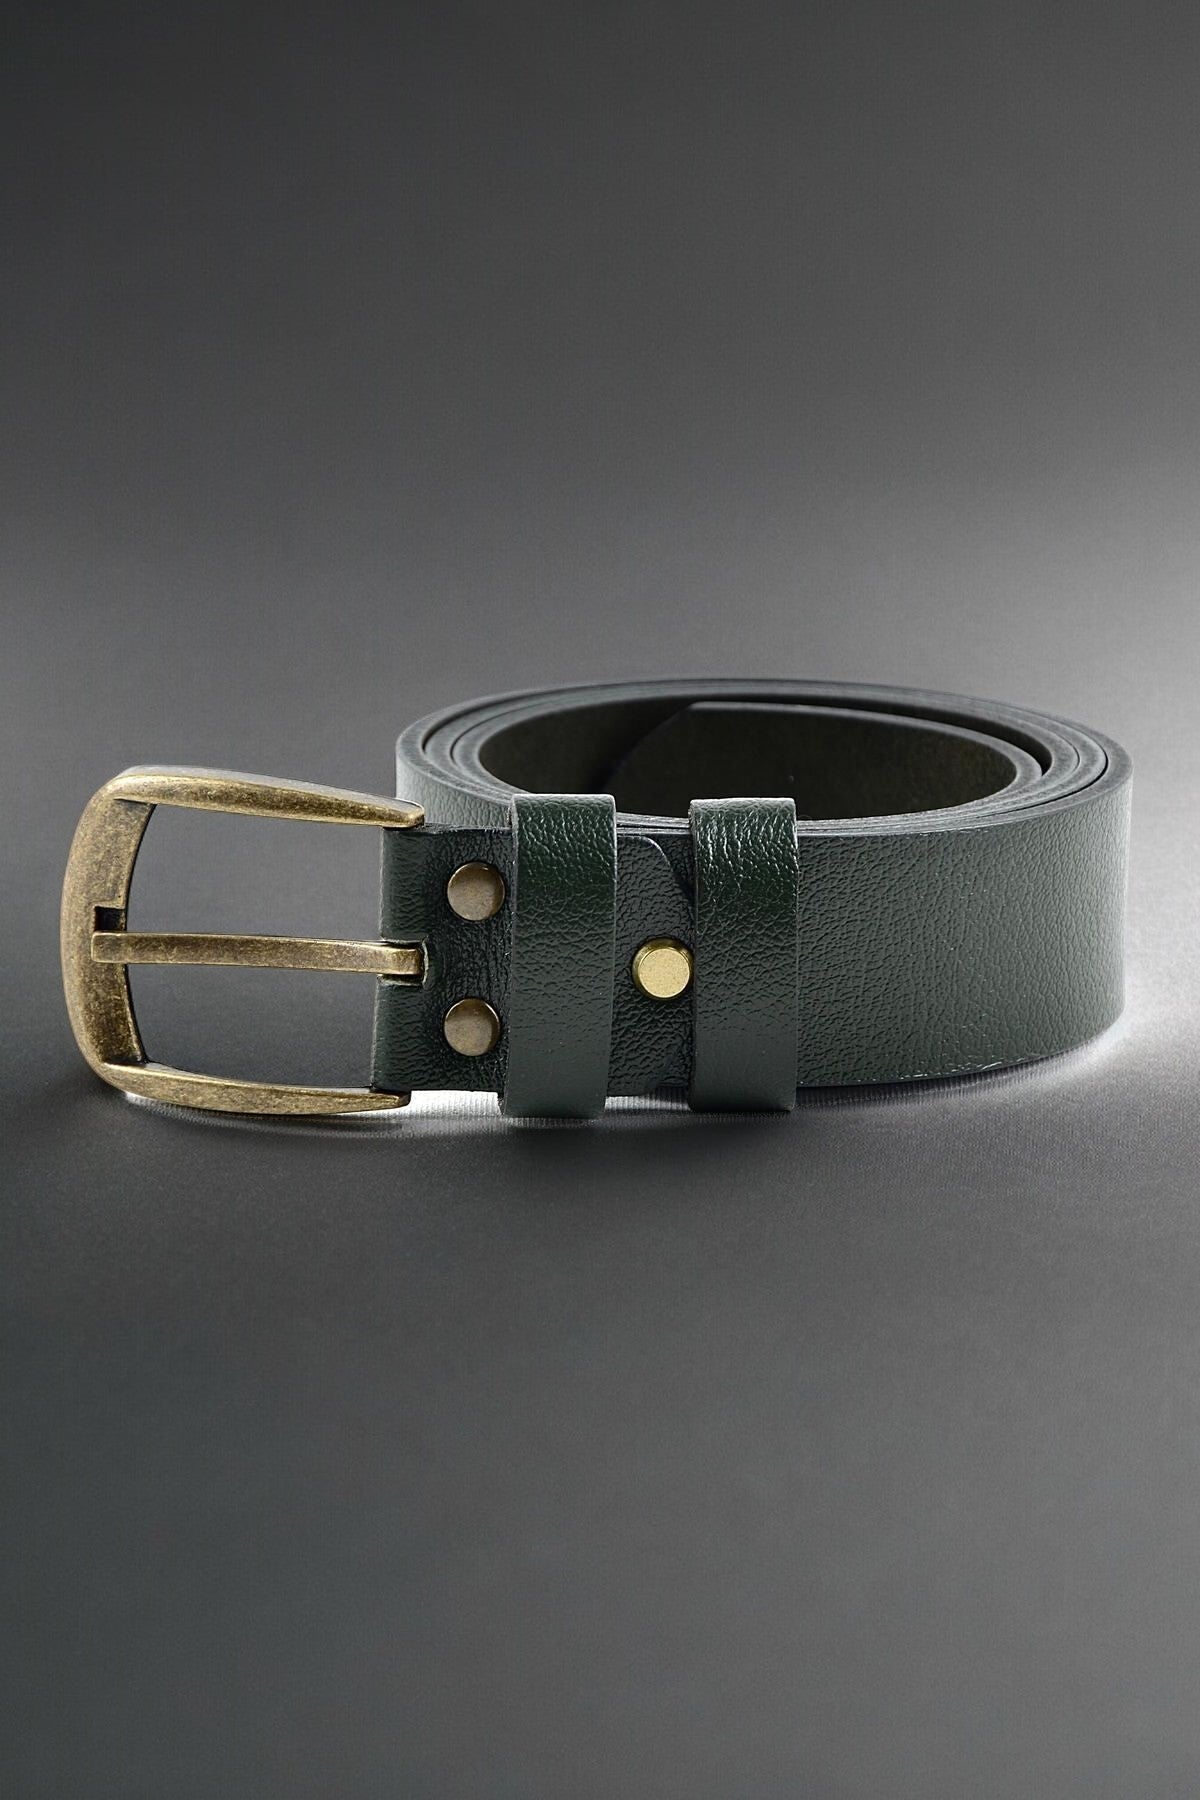 Handmade Leather Belt with Different Color Options  99percenthandmade 32" - 34" Waist inches (70cm-80cm)-Small Green 